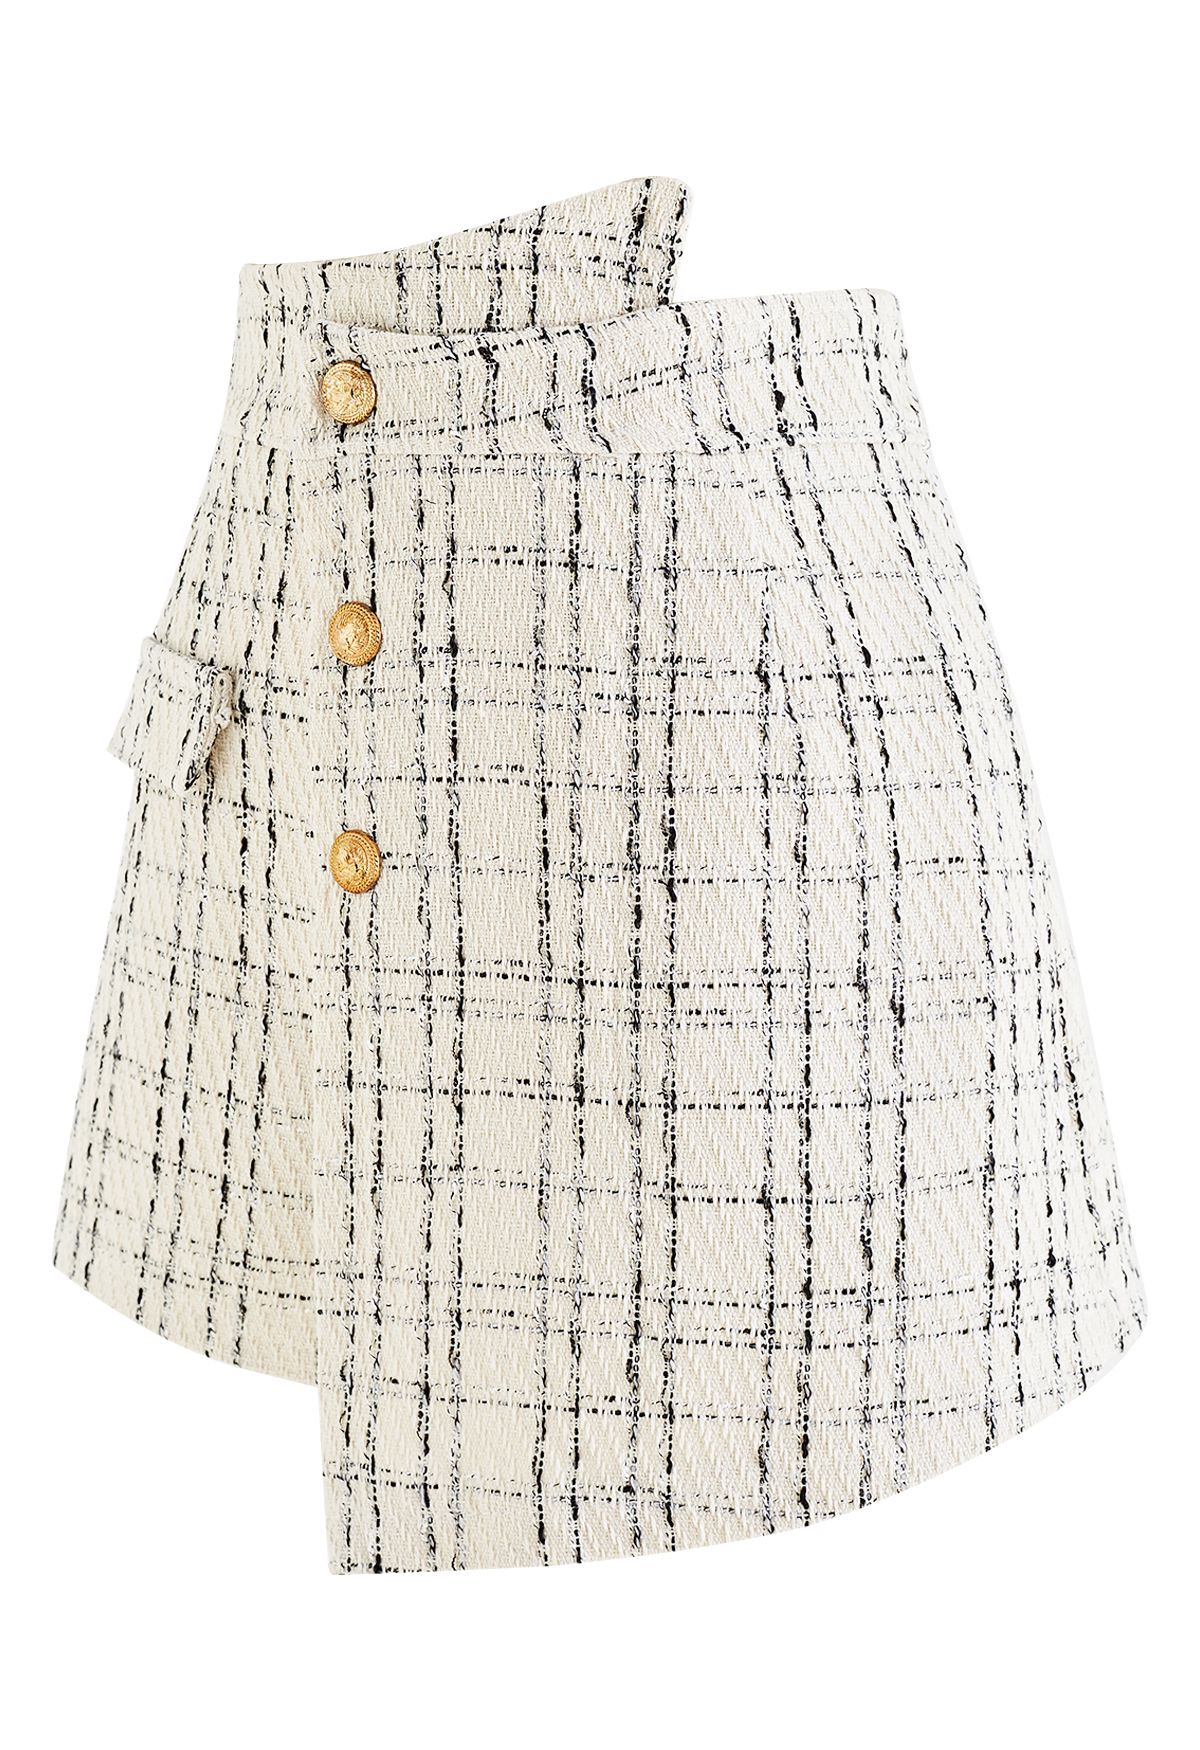 Grid Tweed Buttoned Flap Skorts in Ivory